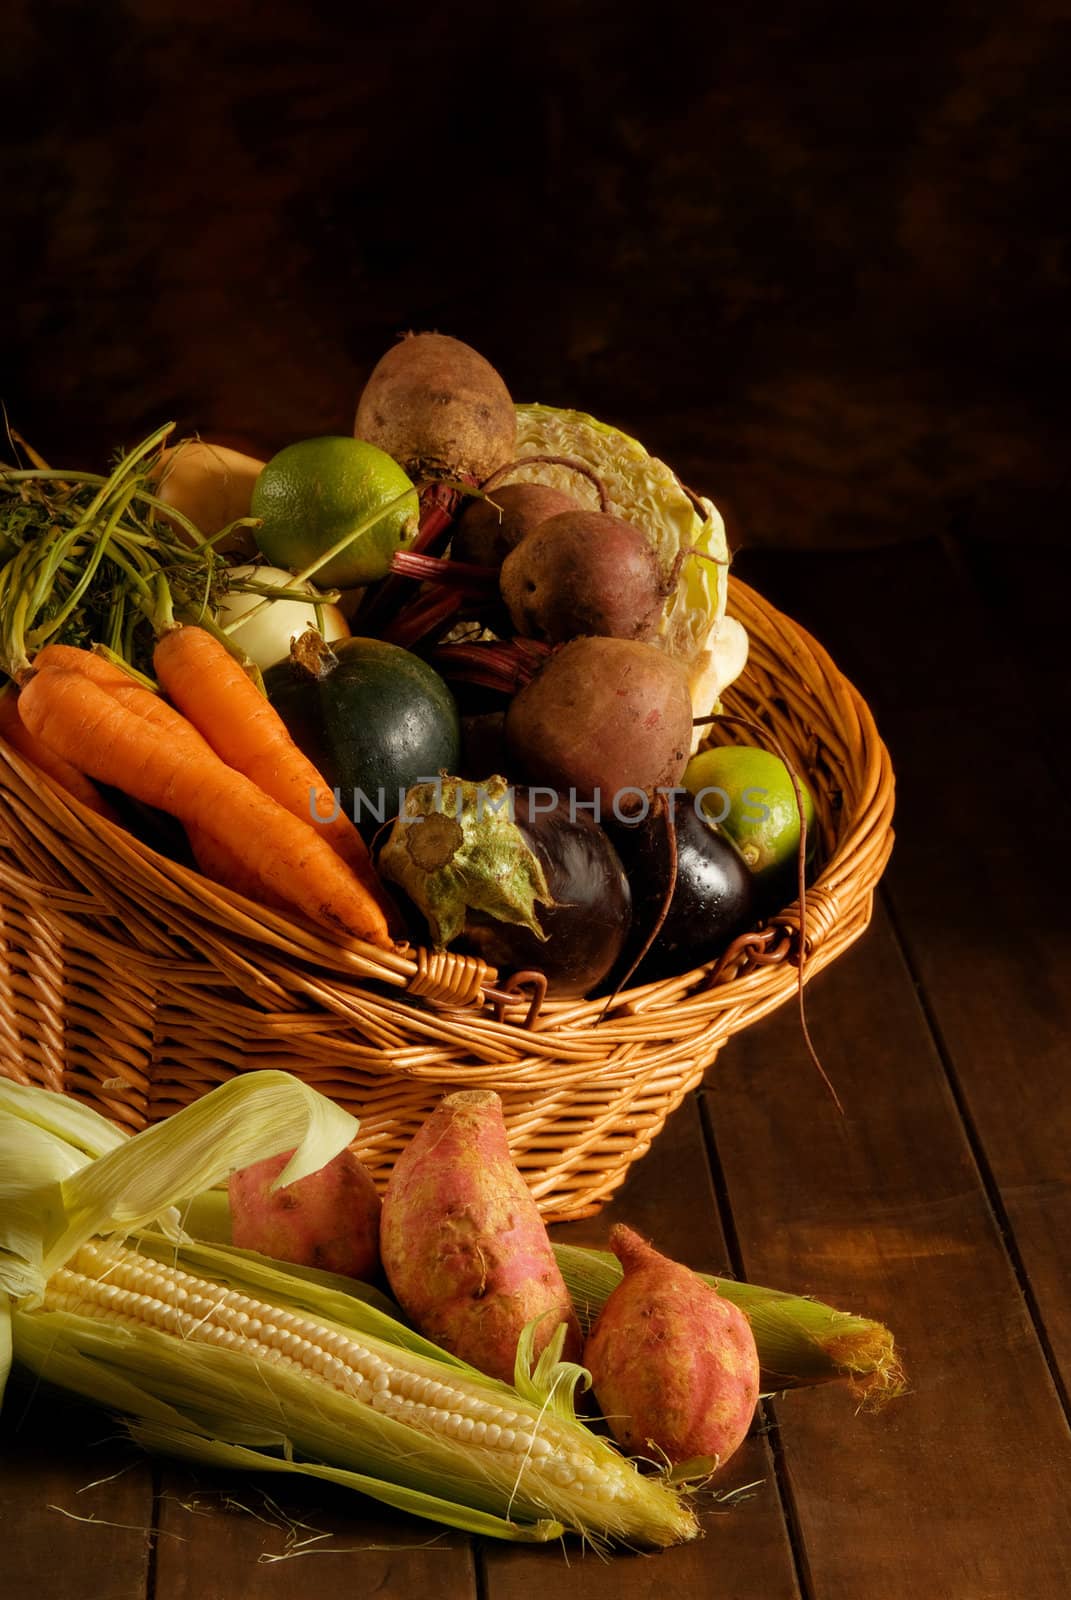 Thanksgiving basket filled with autumn fruits and vegetables on table with mottled background.